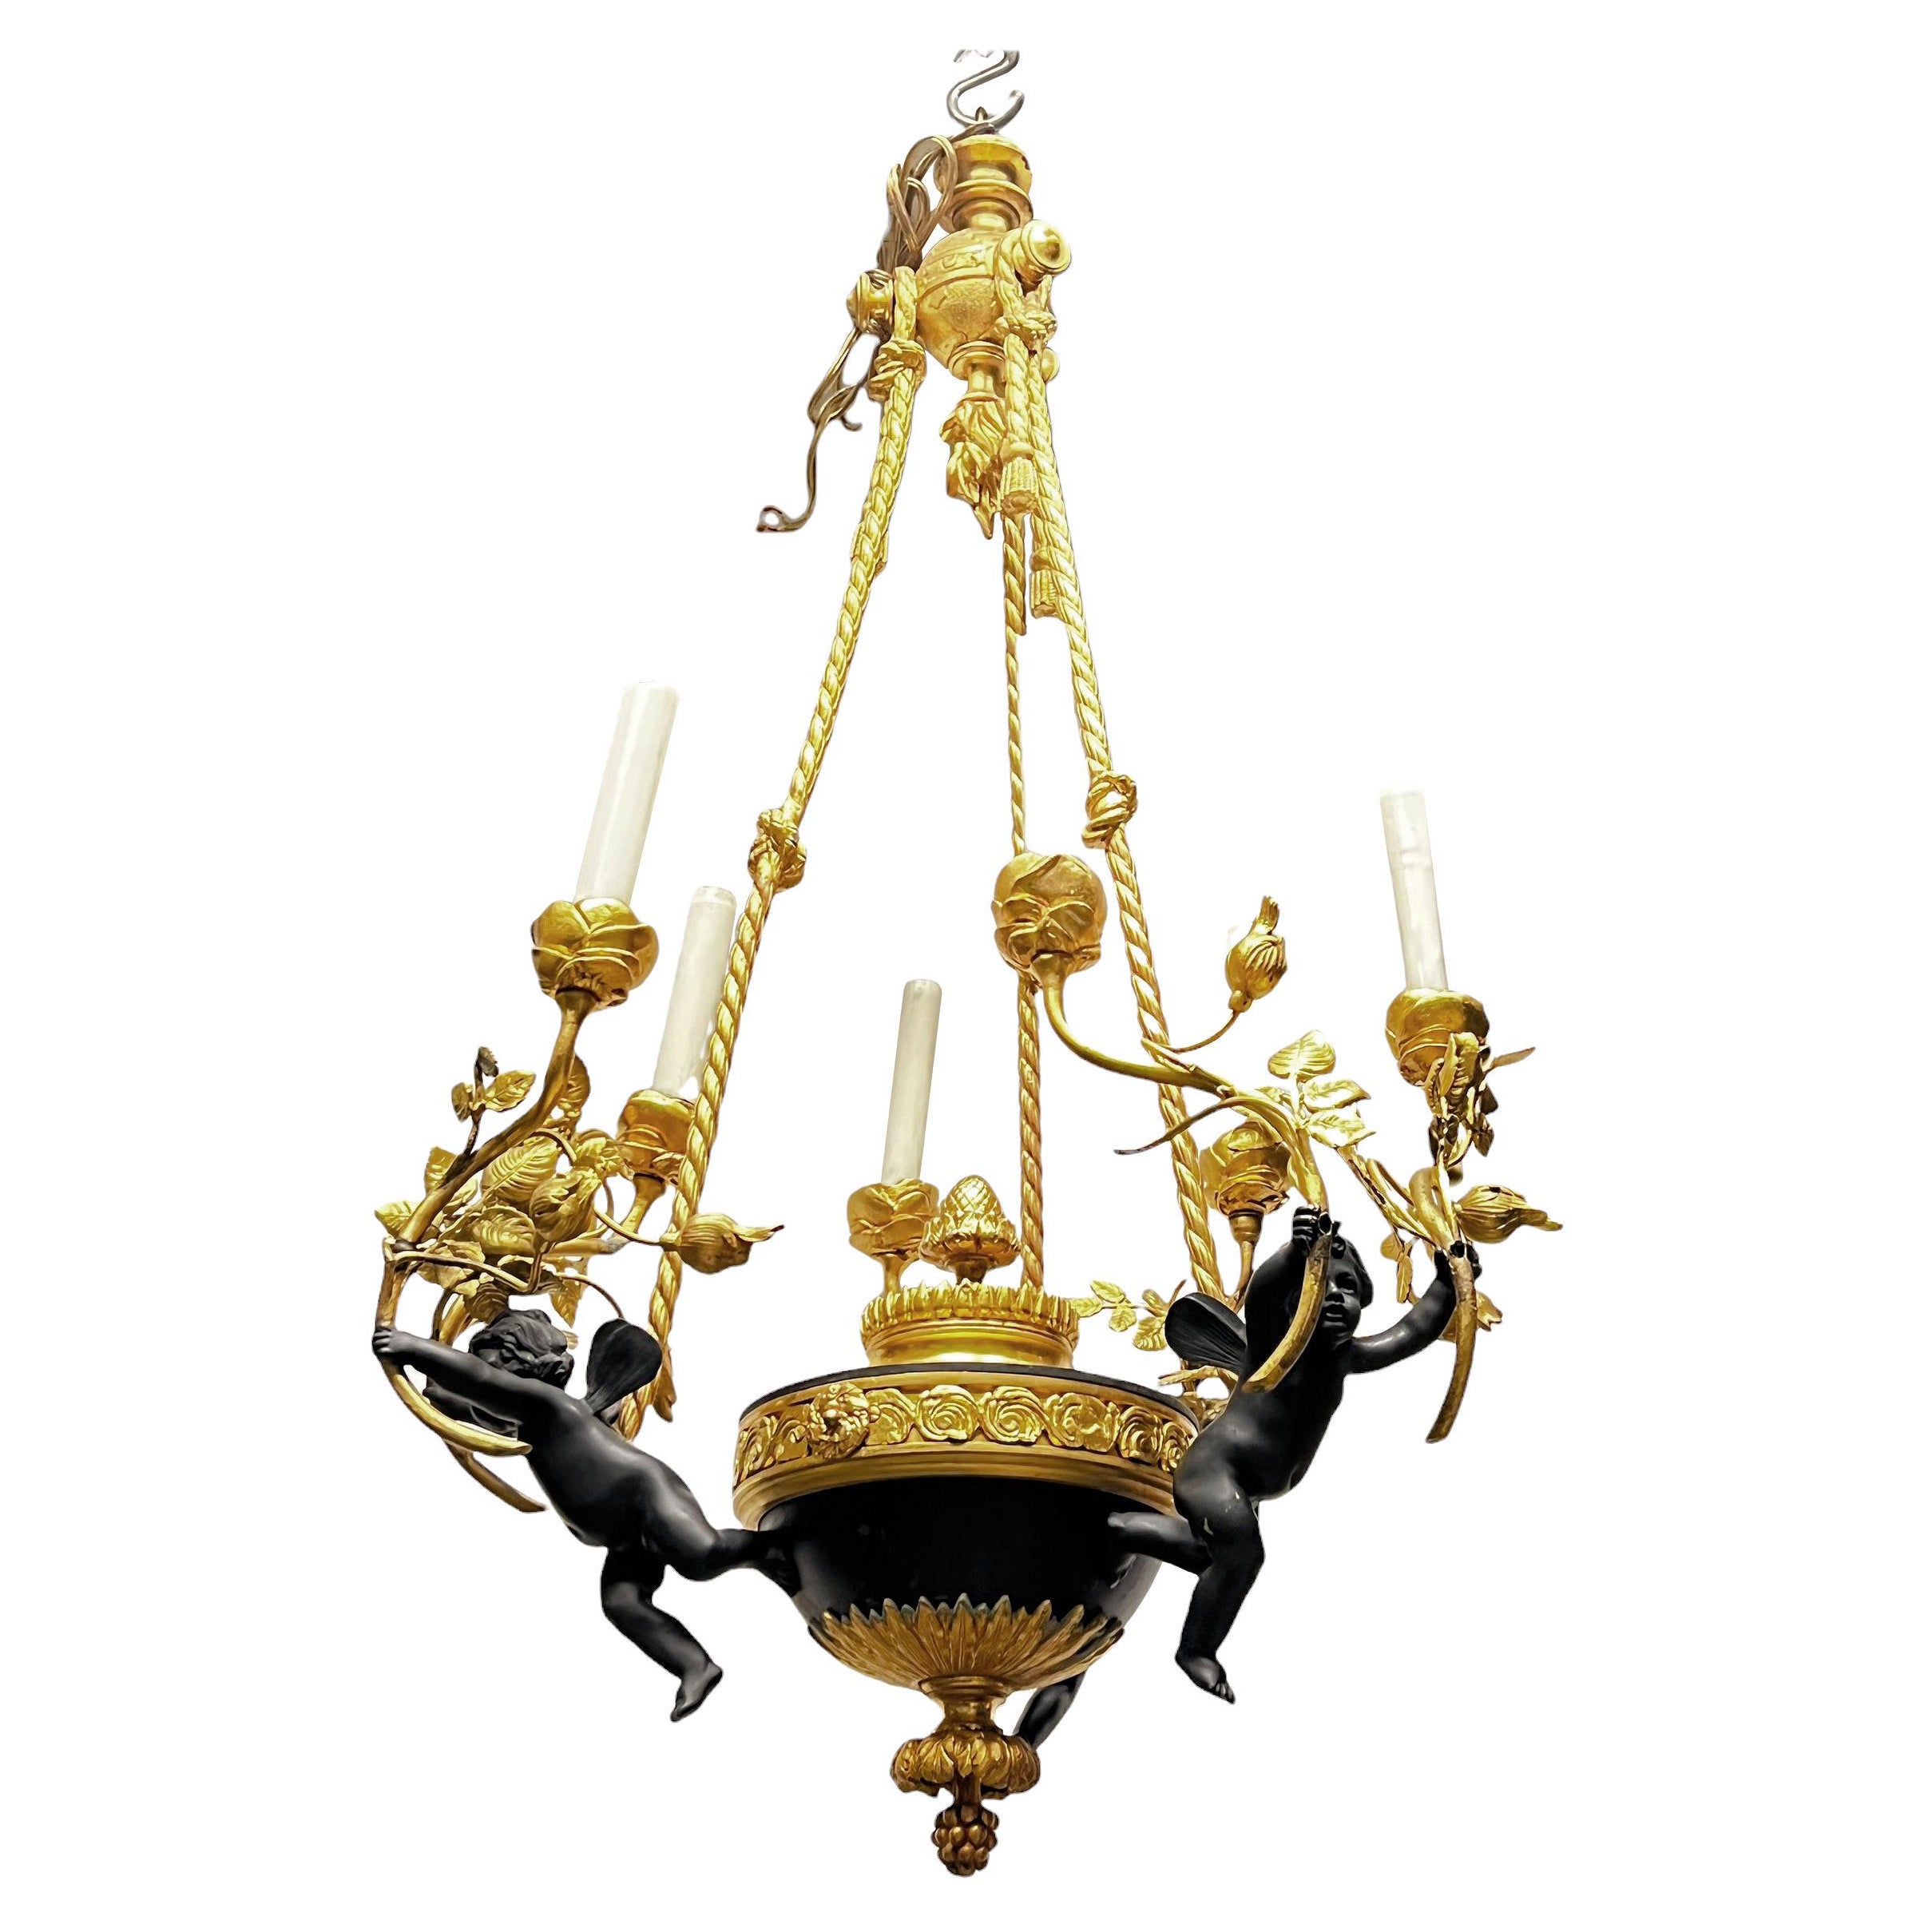 French Louis XVI Style Patinated Bronze Six-Light Putti Motif Chandelier For Sale